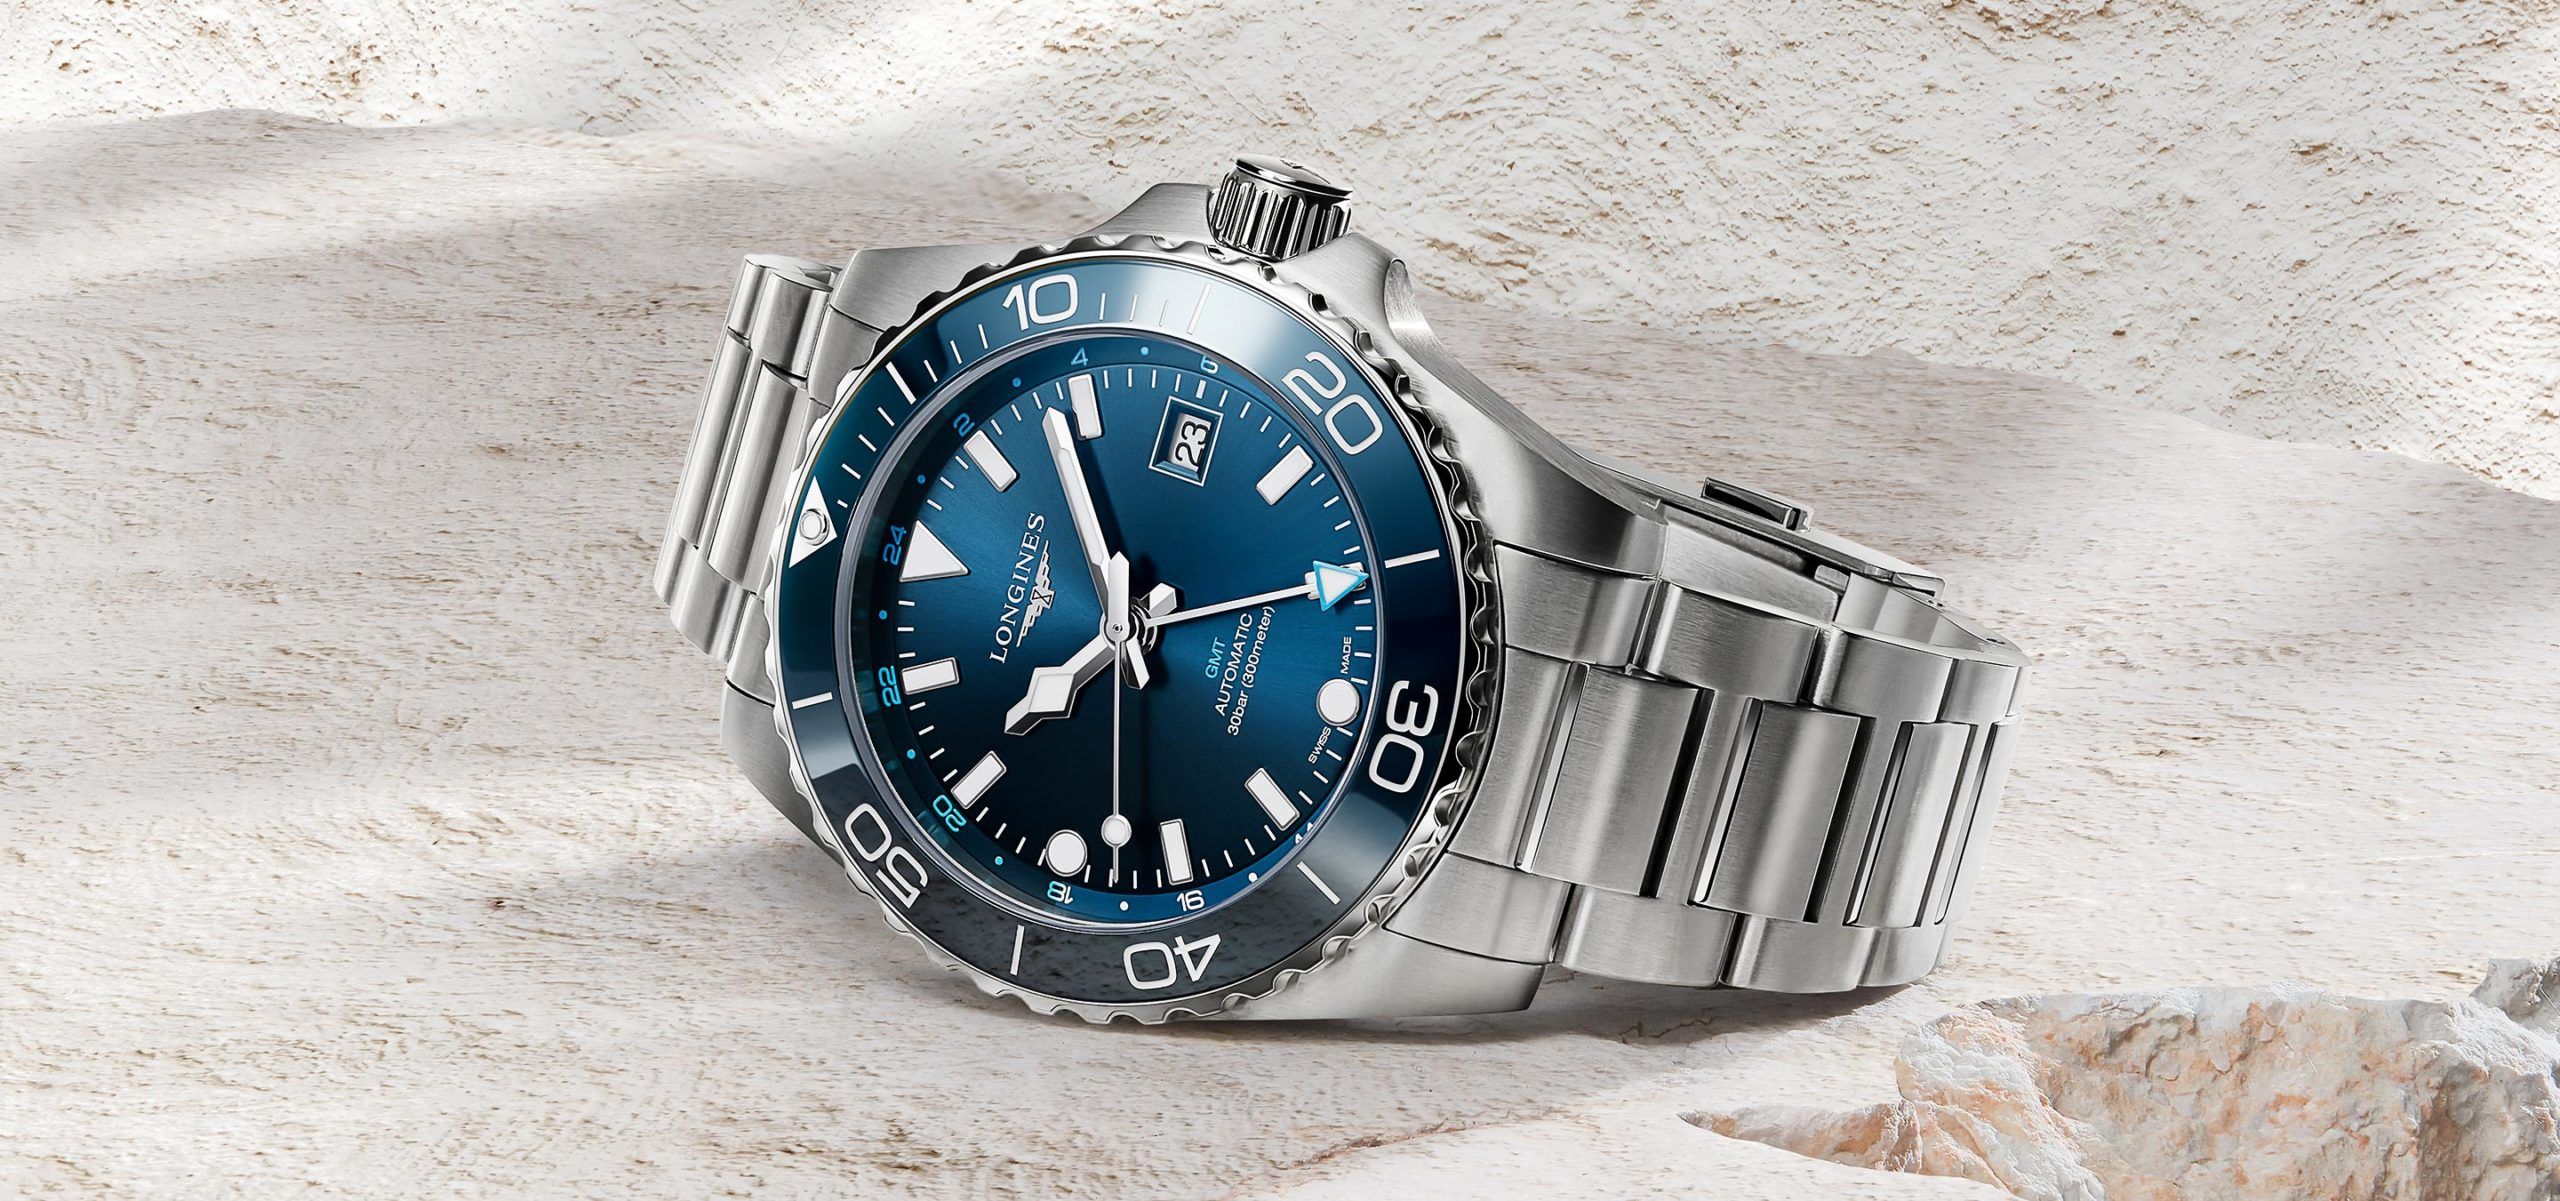 A Global Conquest: Presenting The Latest Longines HydroConquest GMT